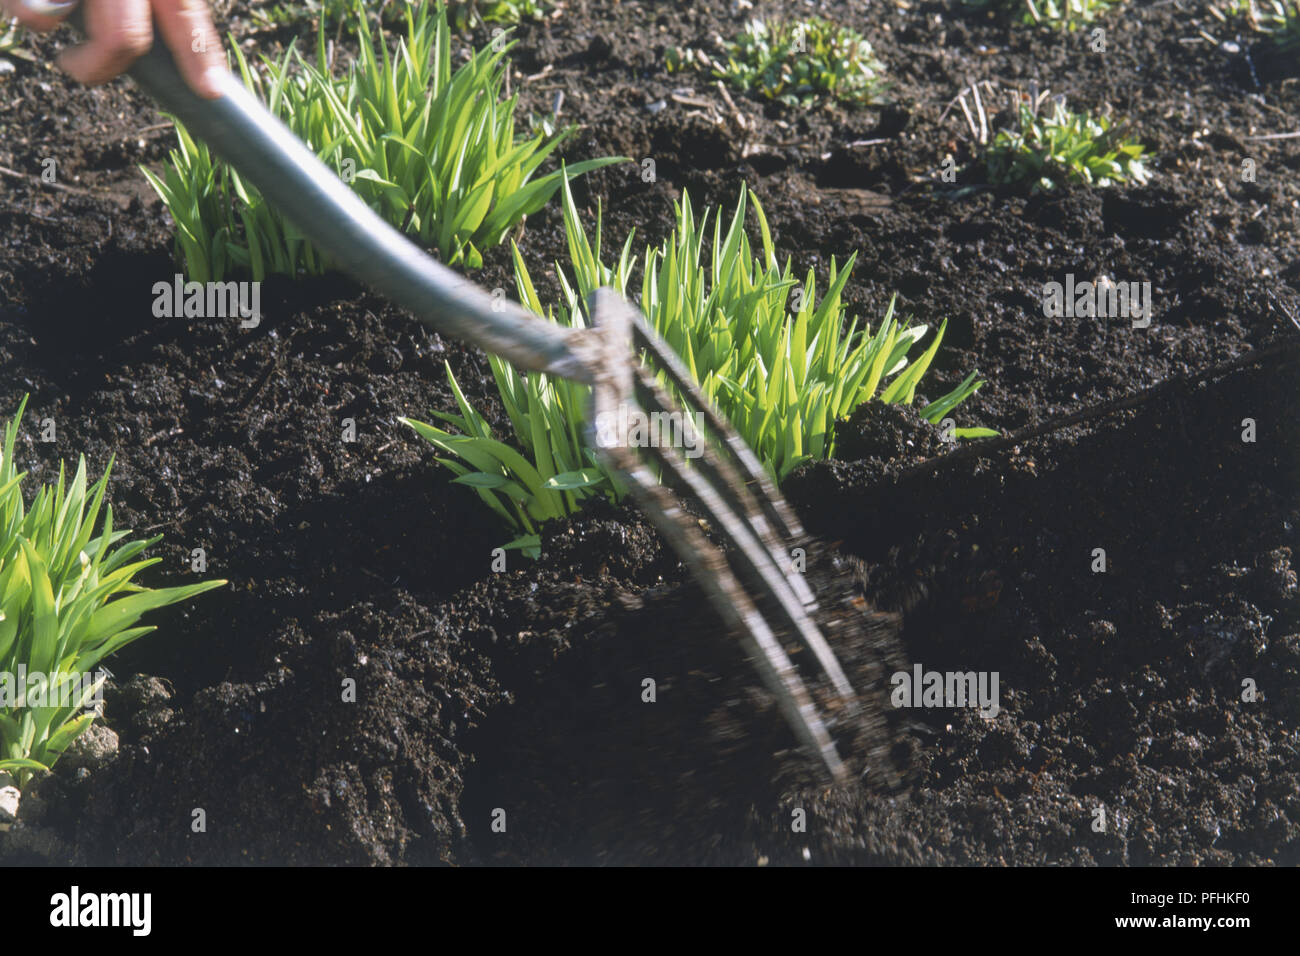 Using A Garden Fork To Add Compost To Soil Stock Photo 216132756